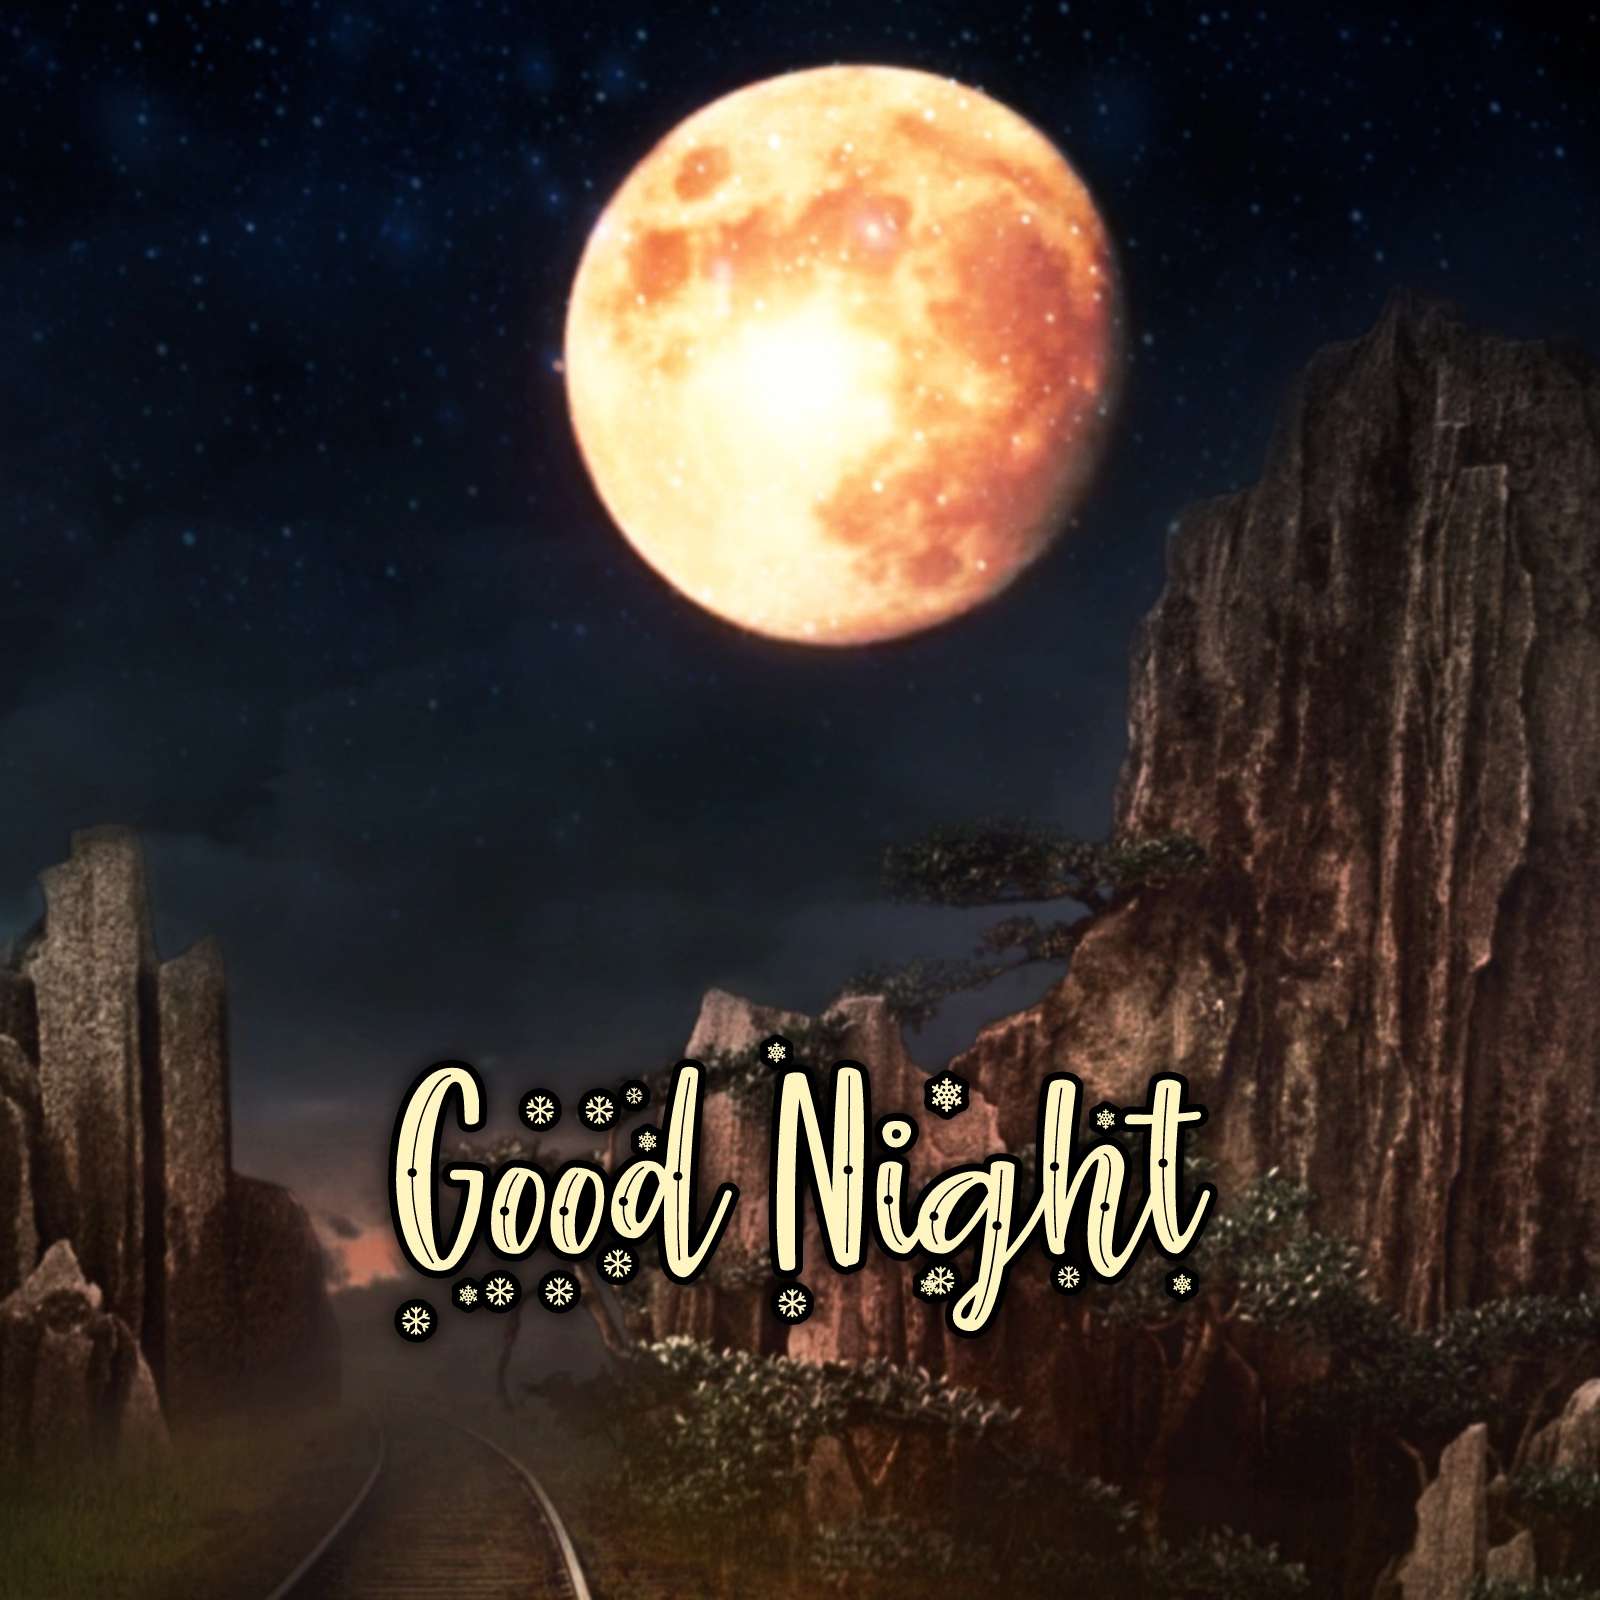 good. night Images • official deep (@201560136) on ShareChat